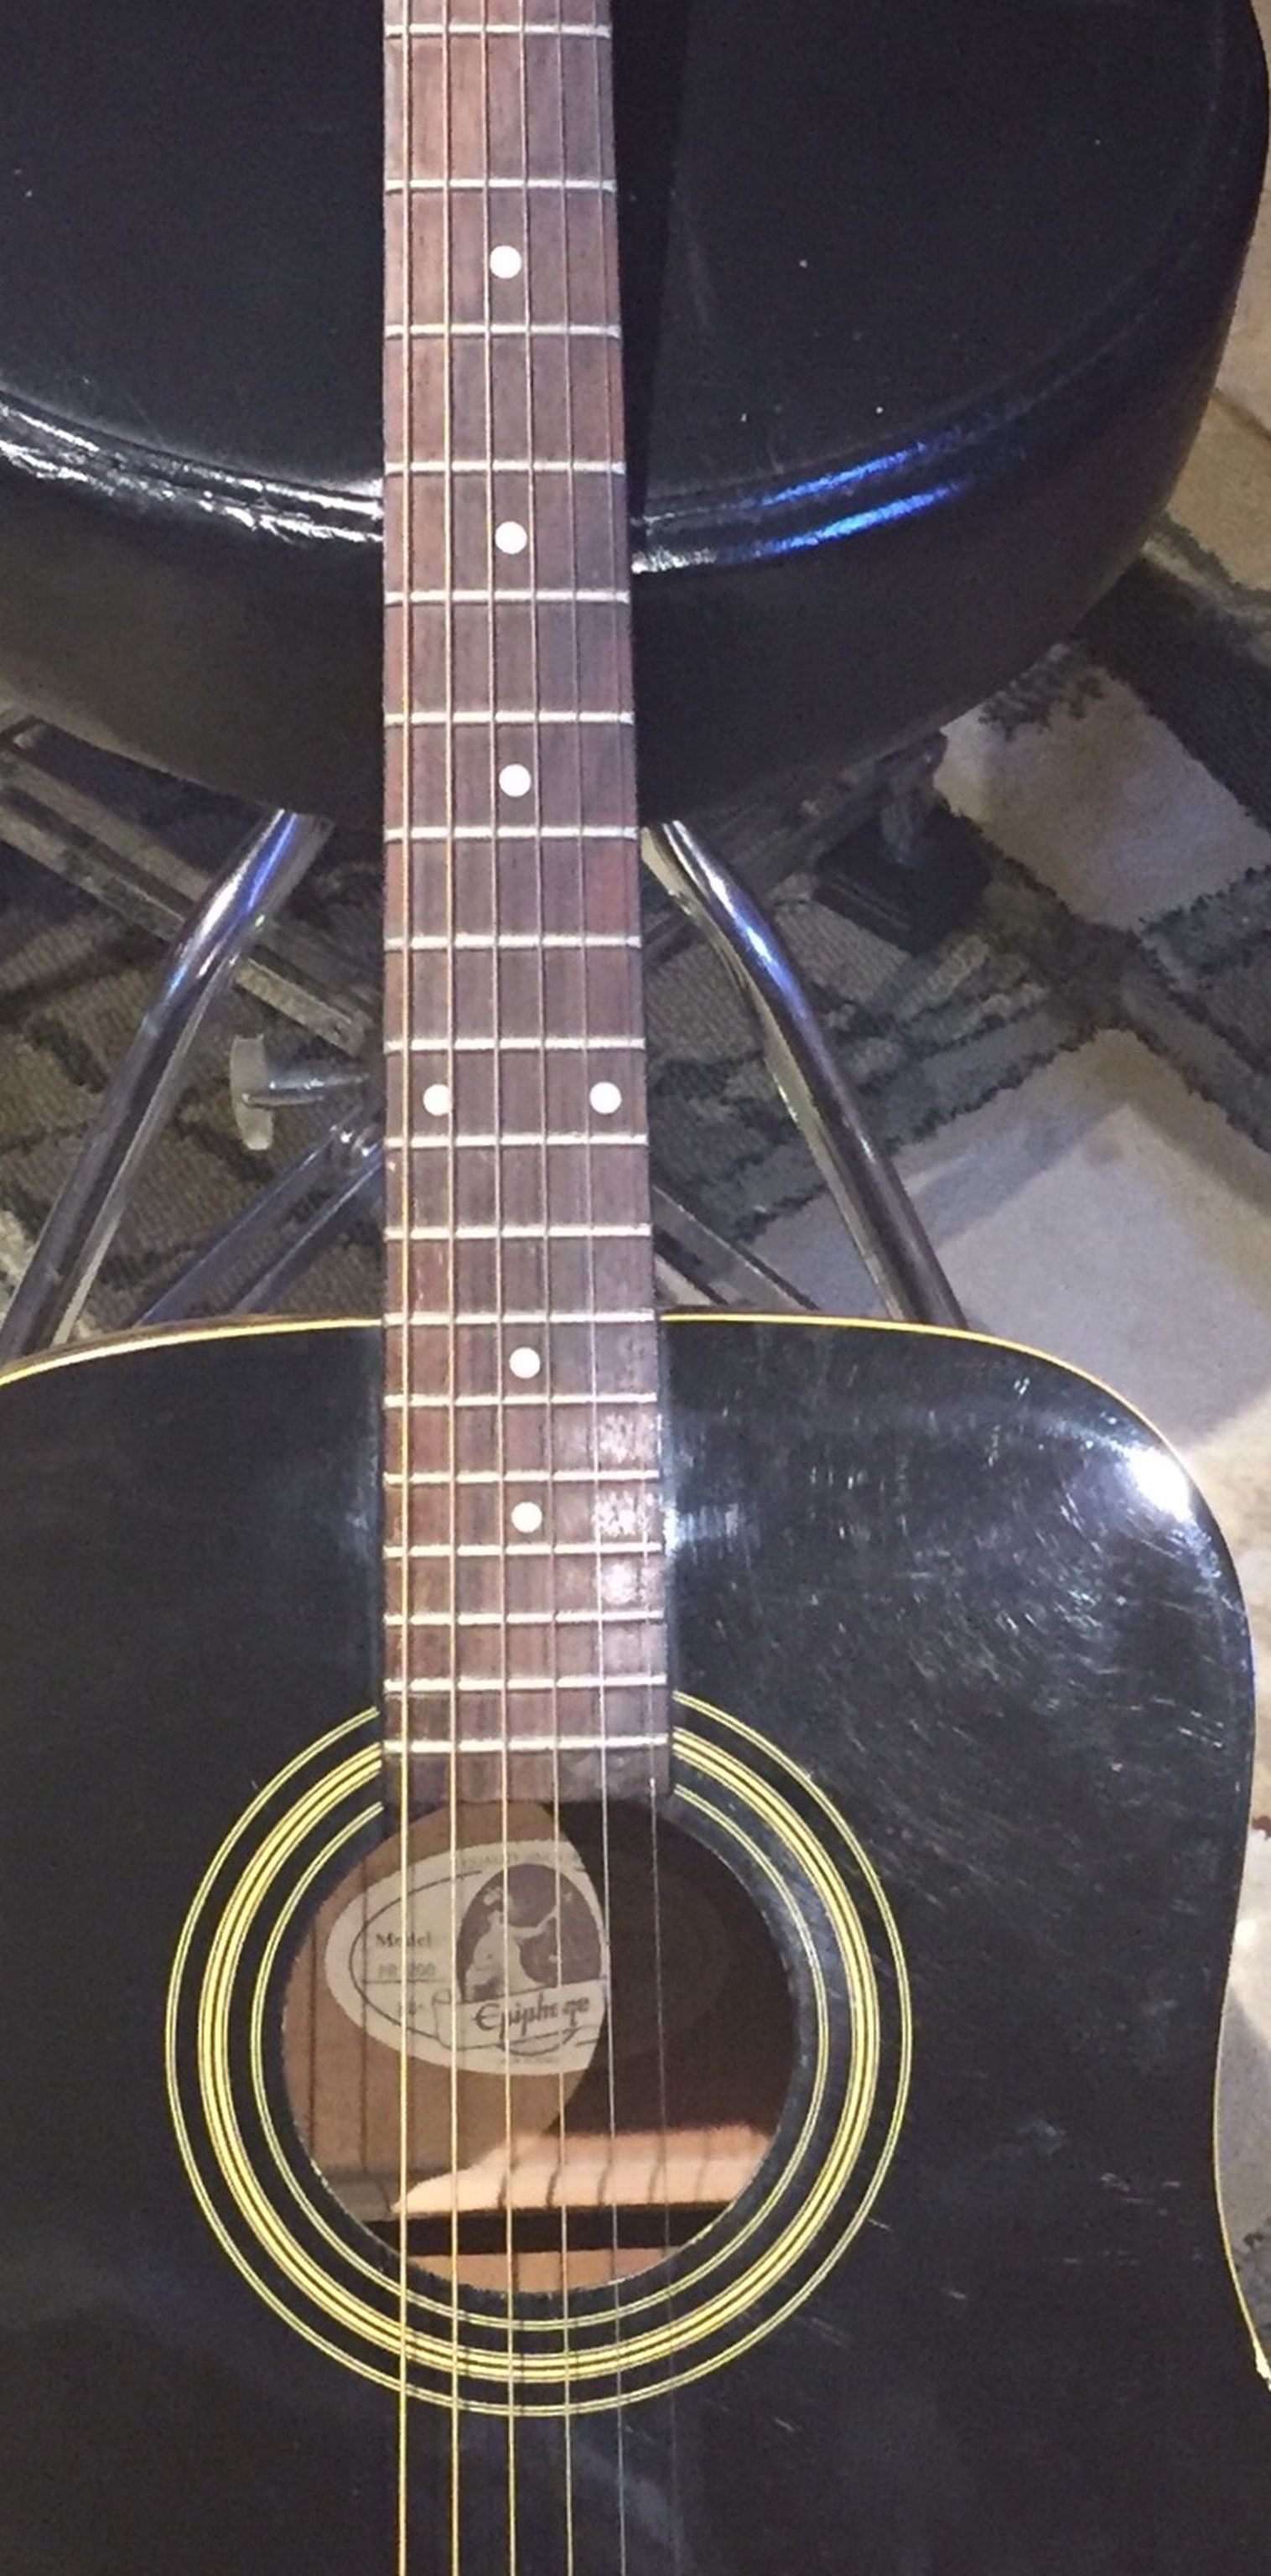 Gibson Epiphone Acoustic Guitar